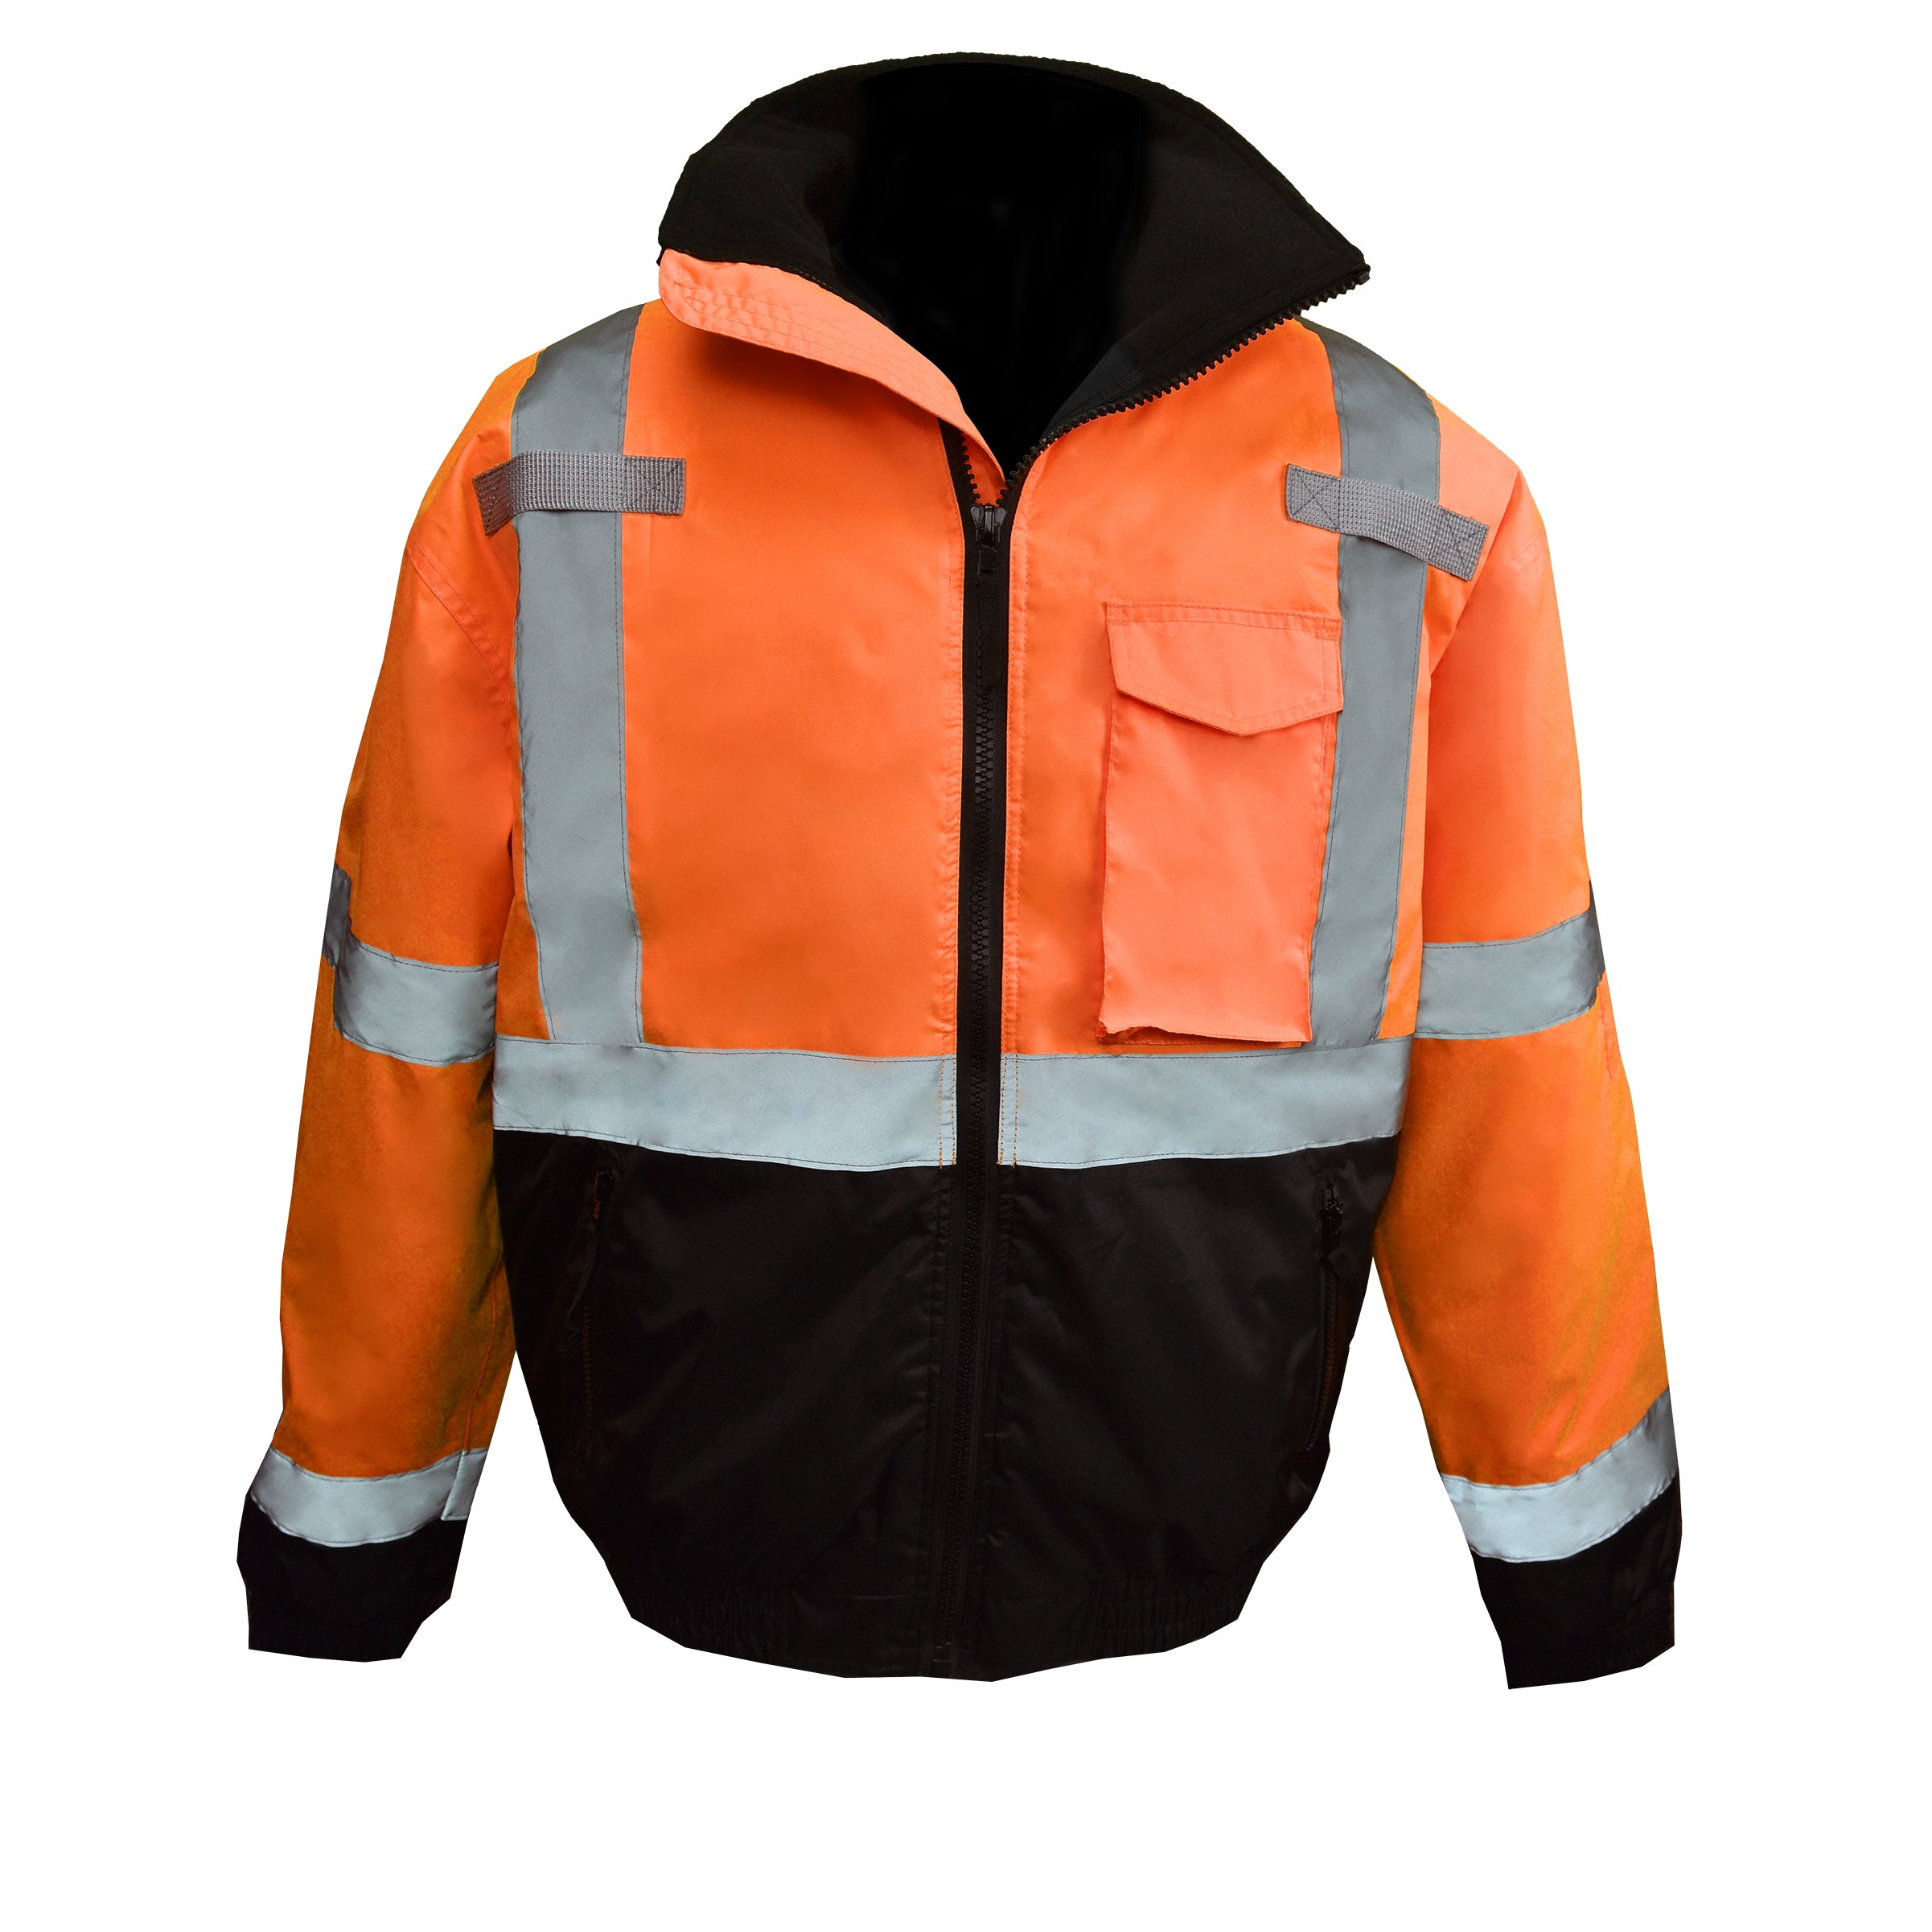 Radians SJ11QB Class3 High Visibility Weatherproof Bomber Jacket with Quilted Built-in Liner-eSafety Supplies, Inc